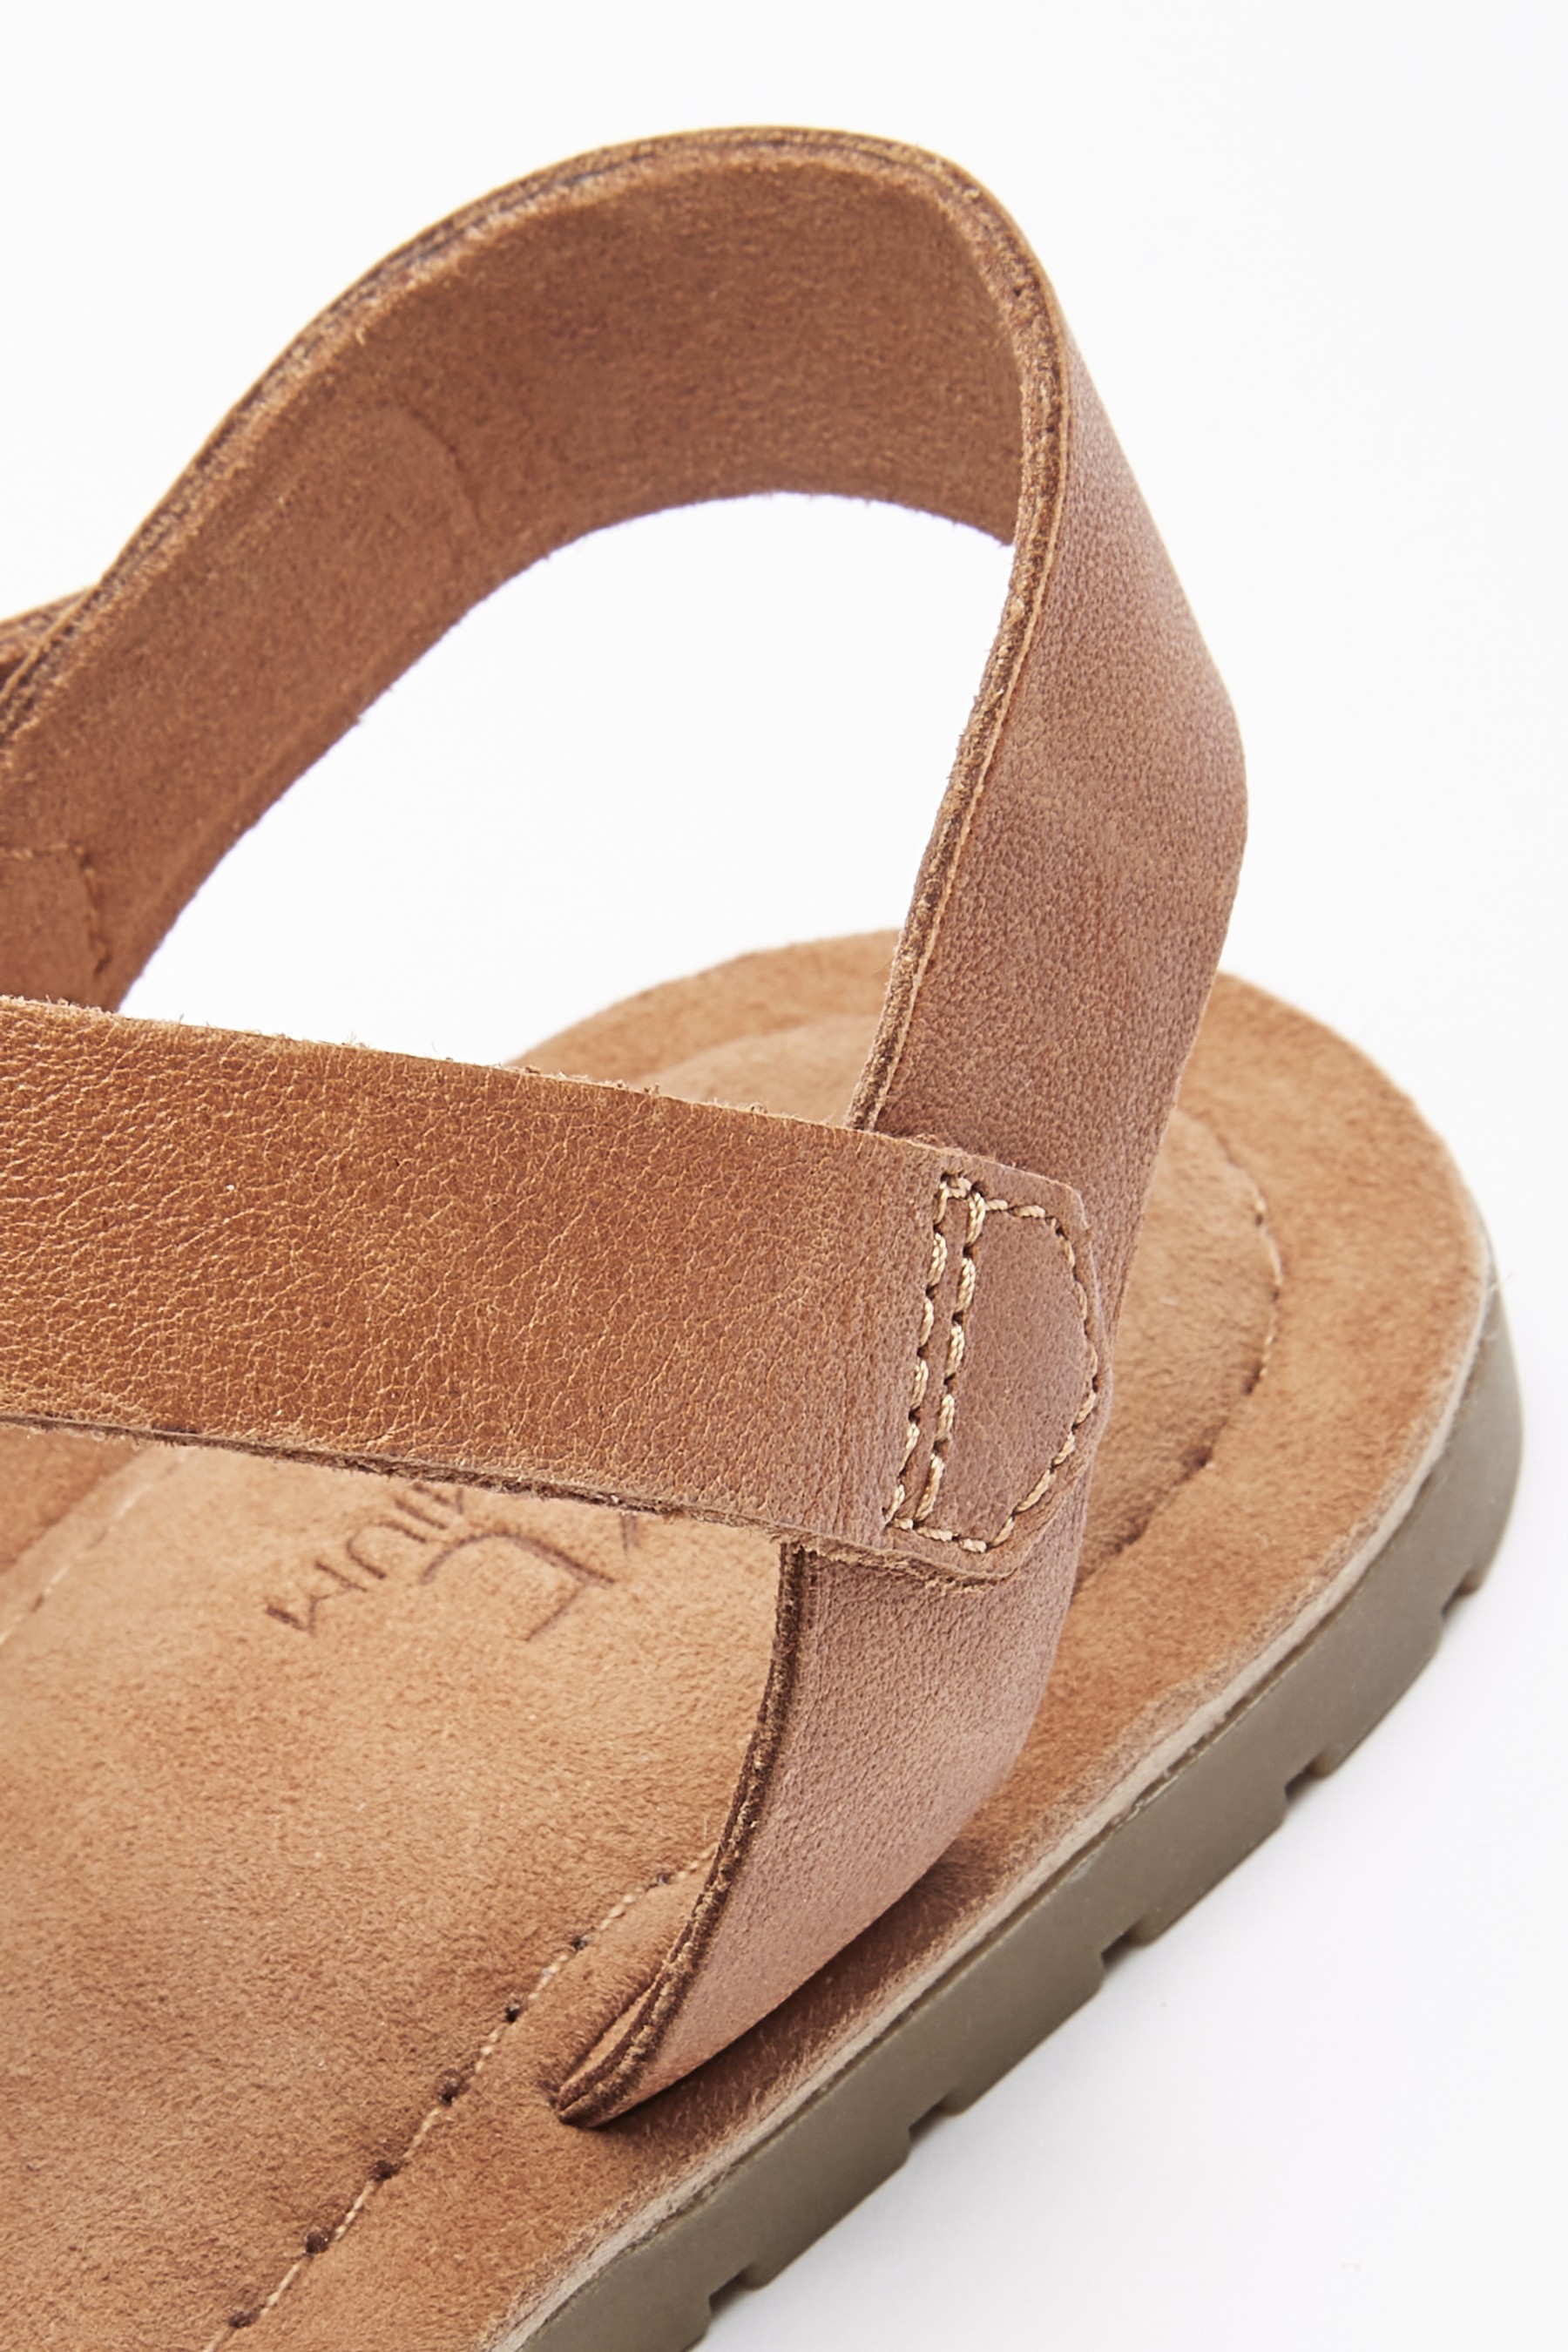 Premium Woven Leather Sandals Standard Fit (F)